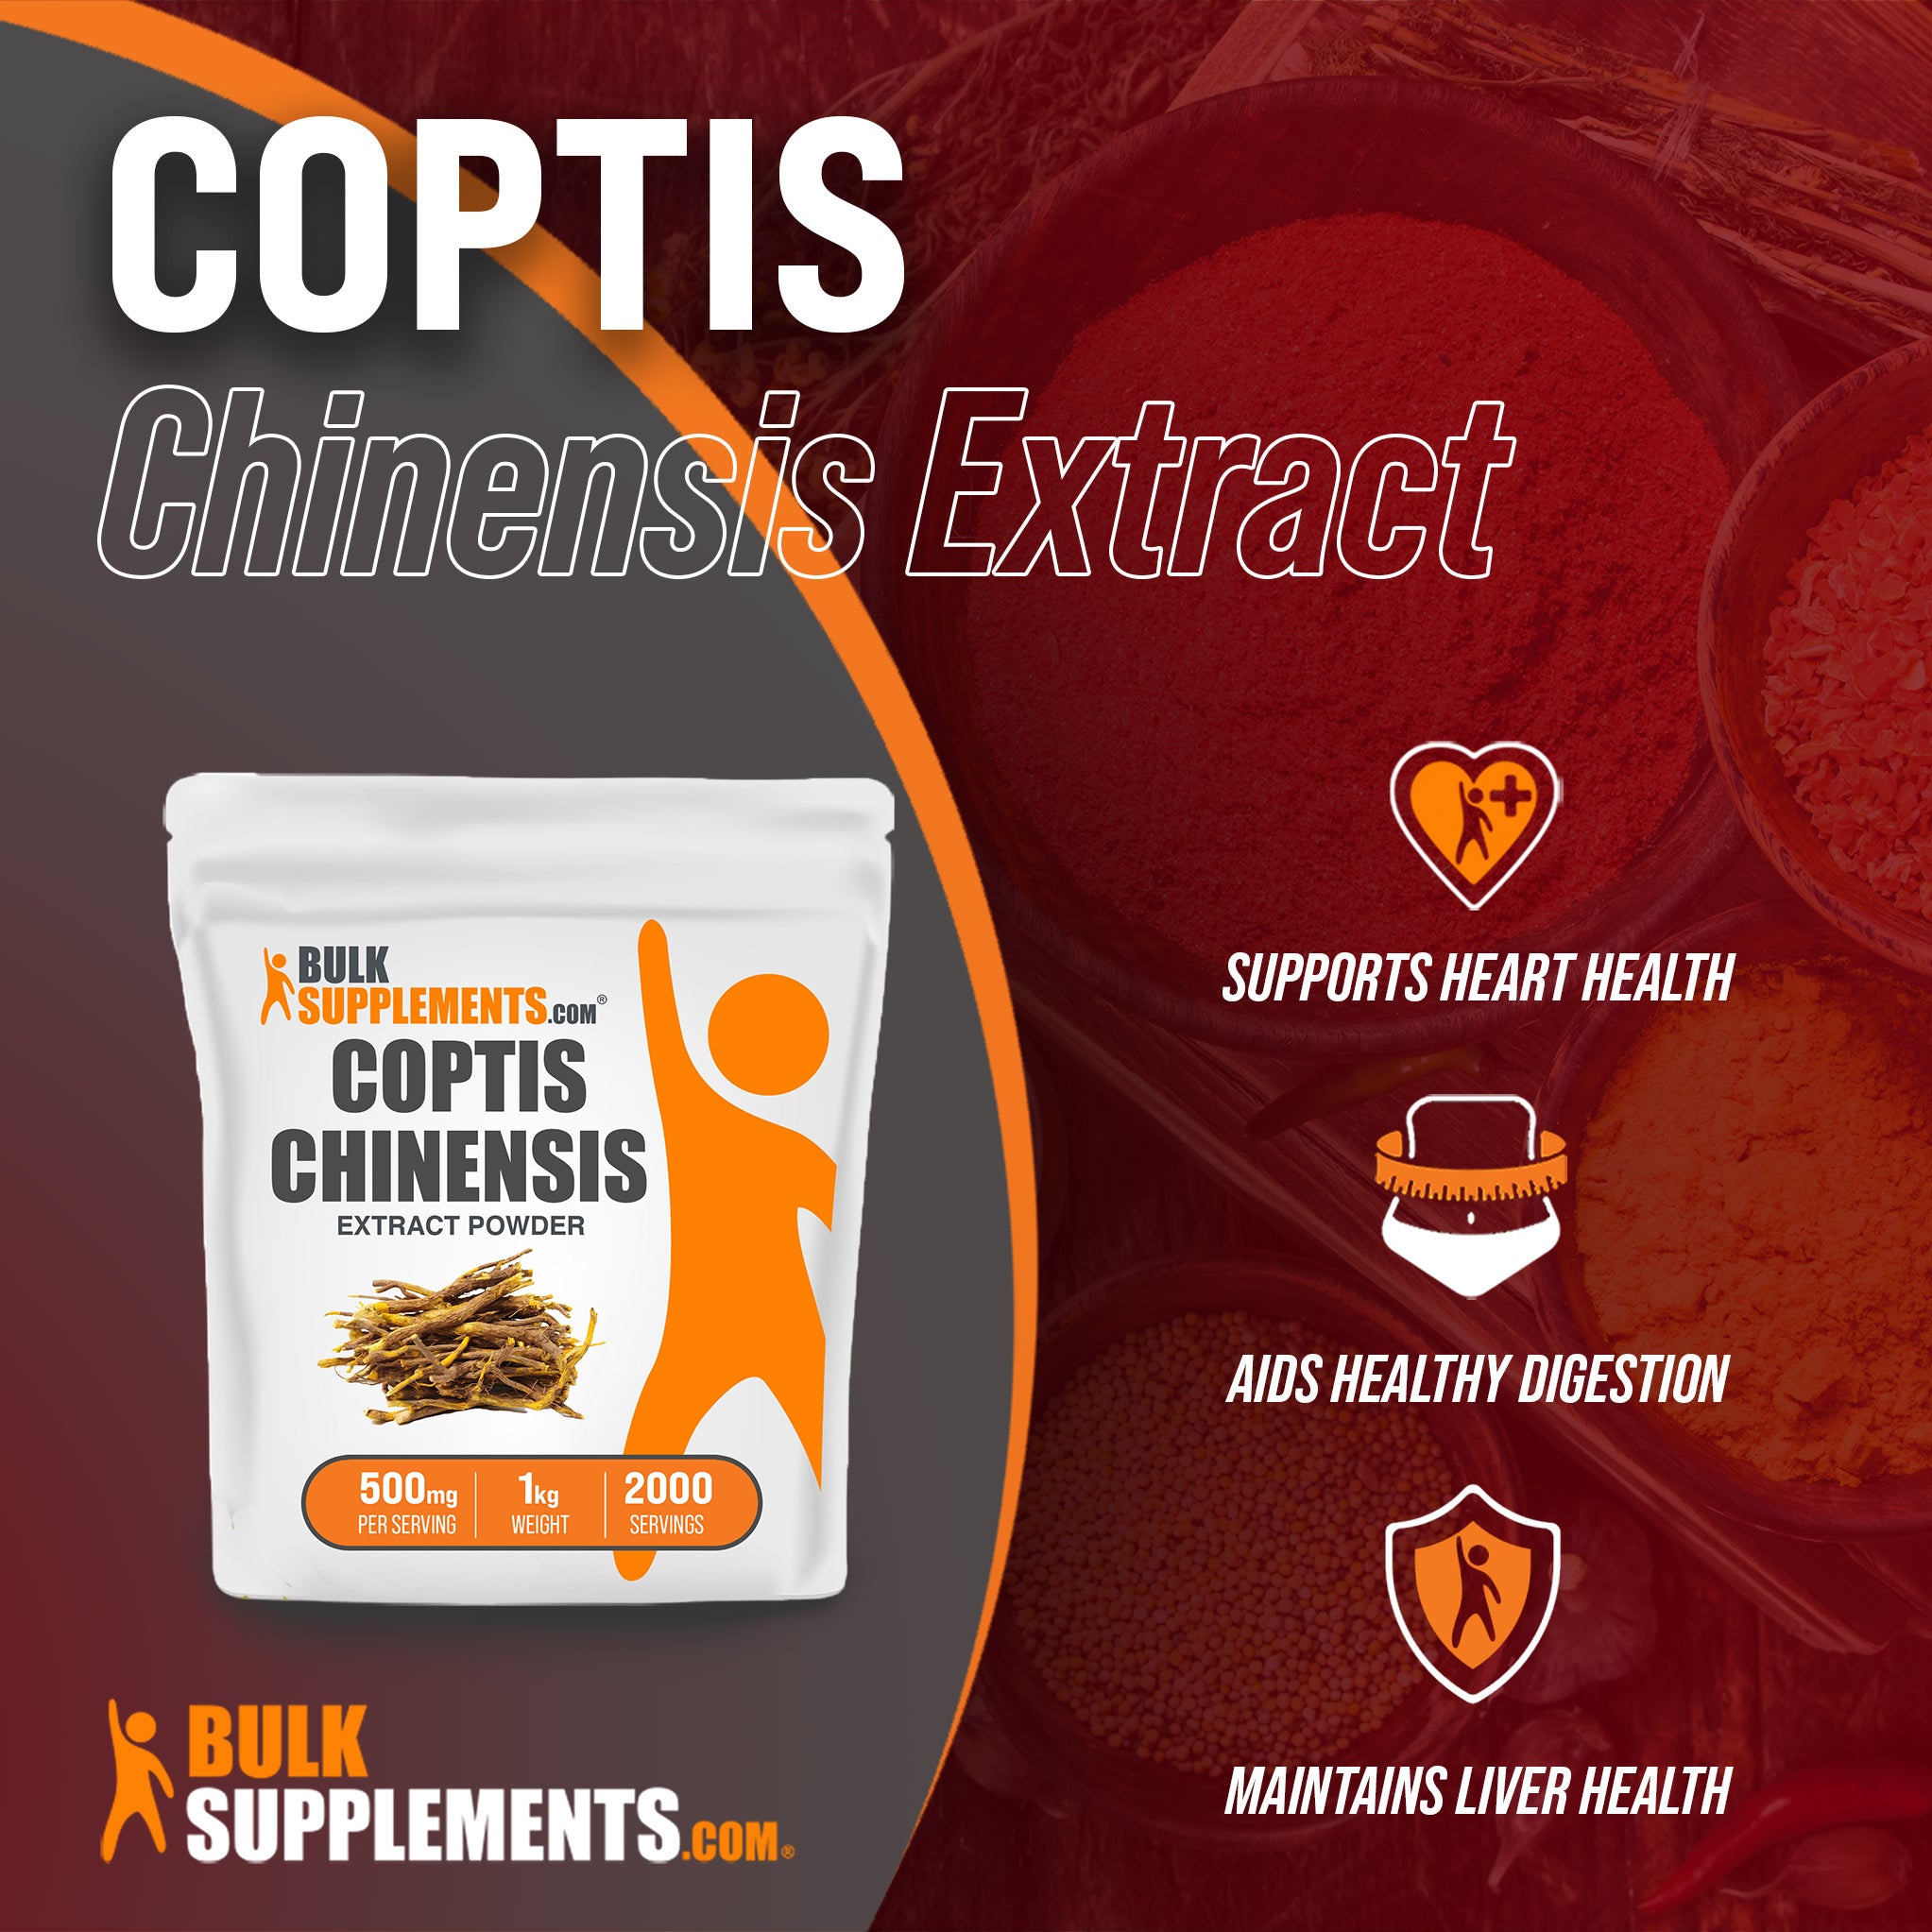 Benefits of 1kg Coptis Chinensis; supports heart health, aids healthy digestion, maintains liver health